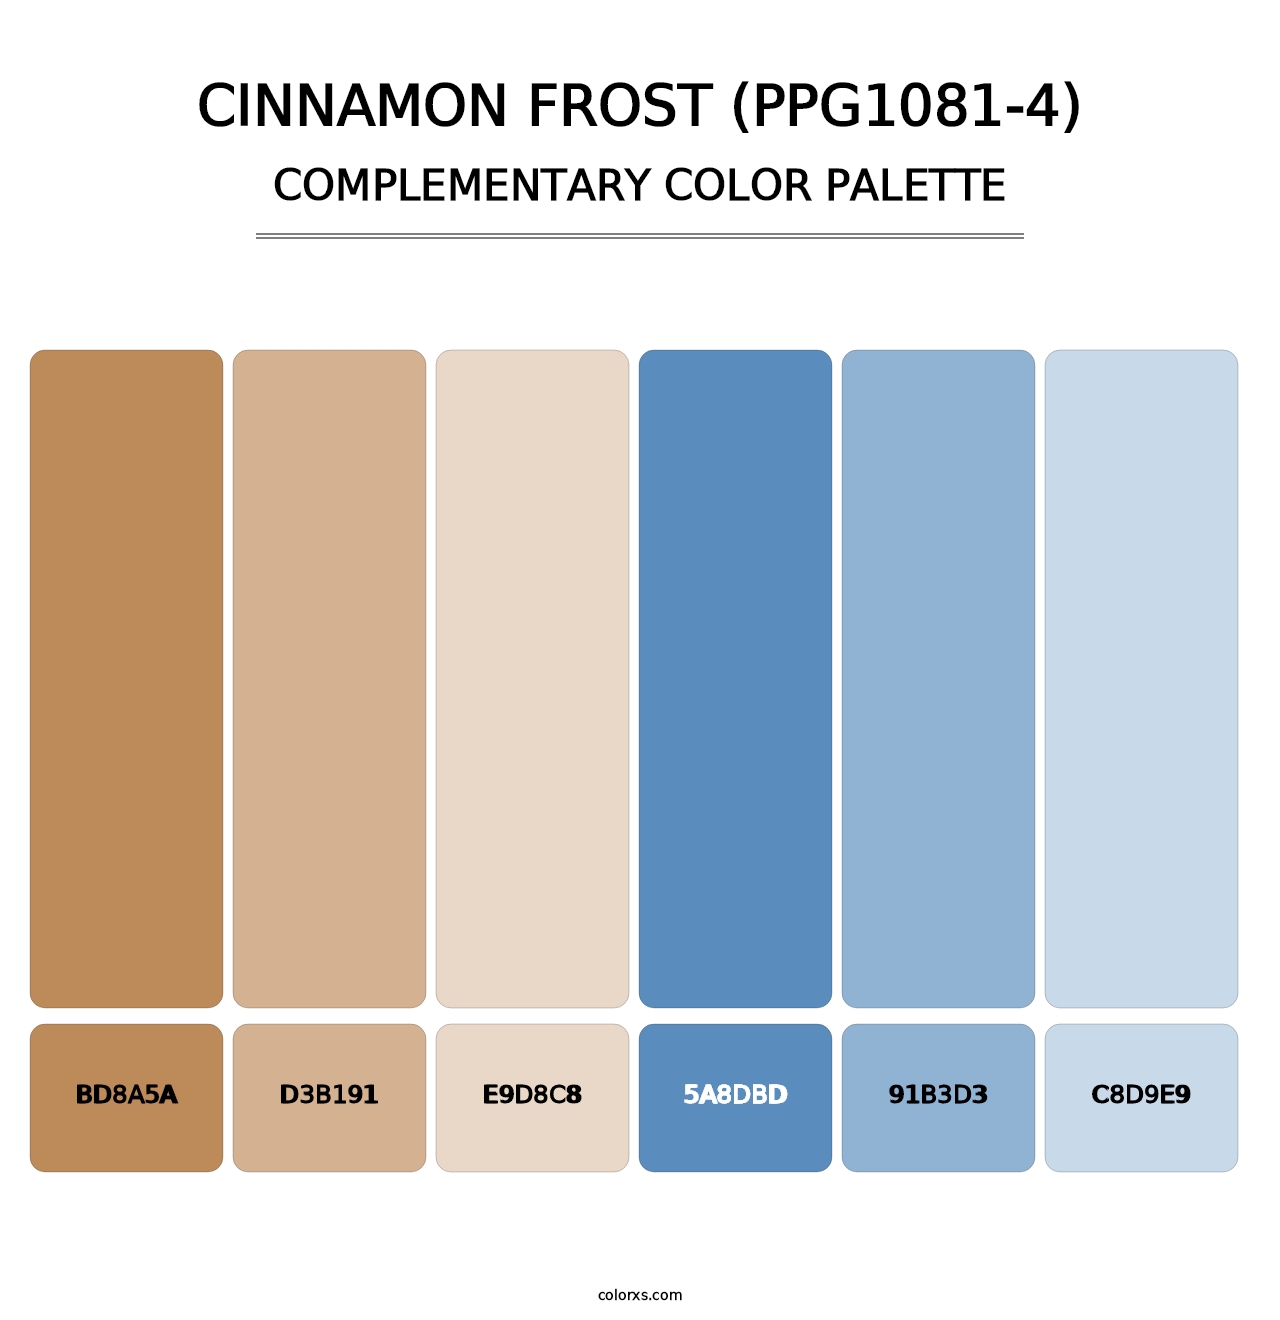 Cinnamon Frost (PPG1081-4) - Complementary Color Palette